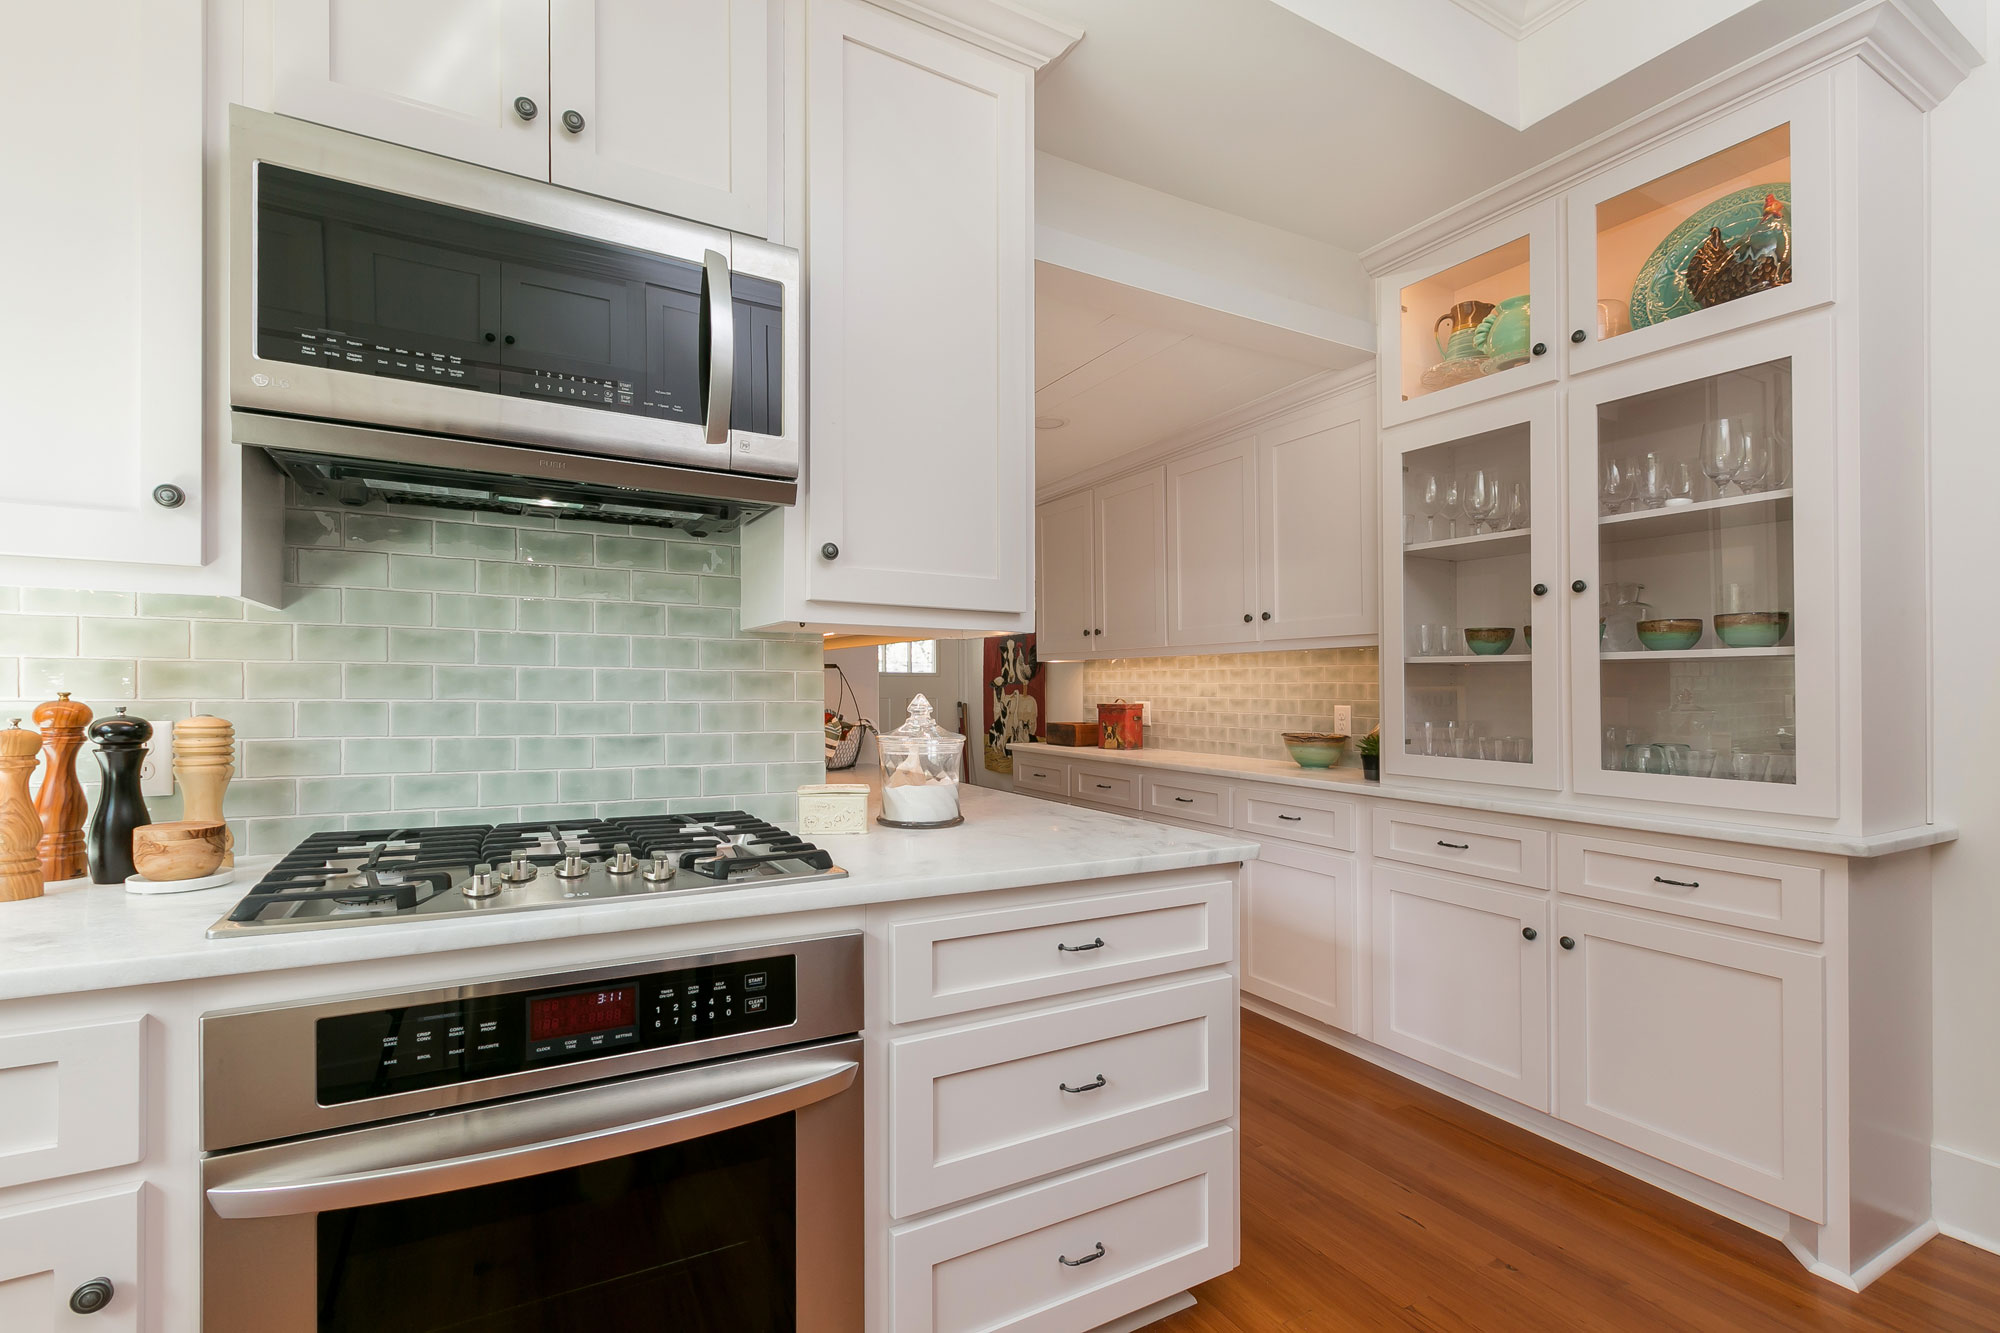 Kitchen renovation in historic home in Summerville, SC